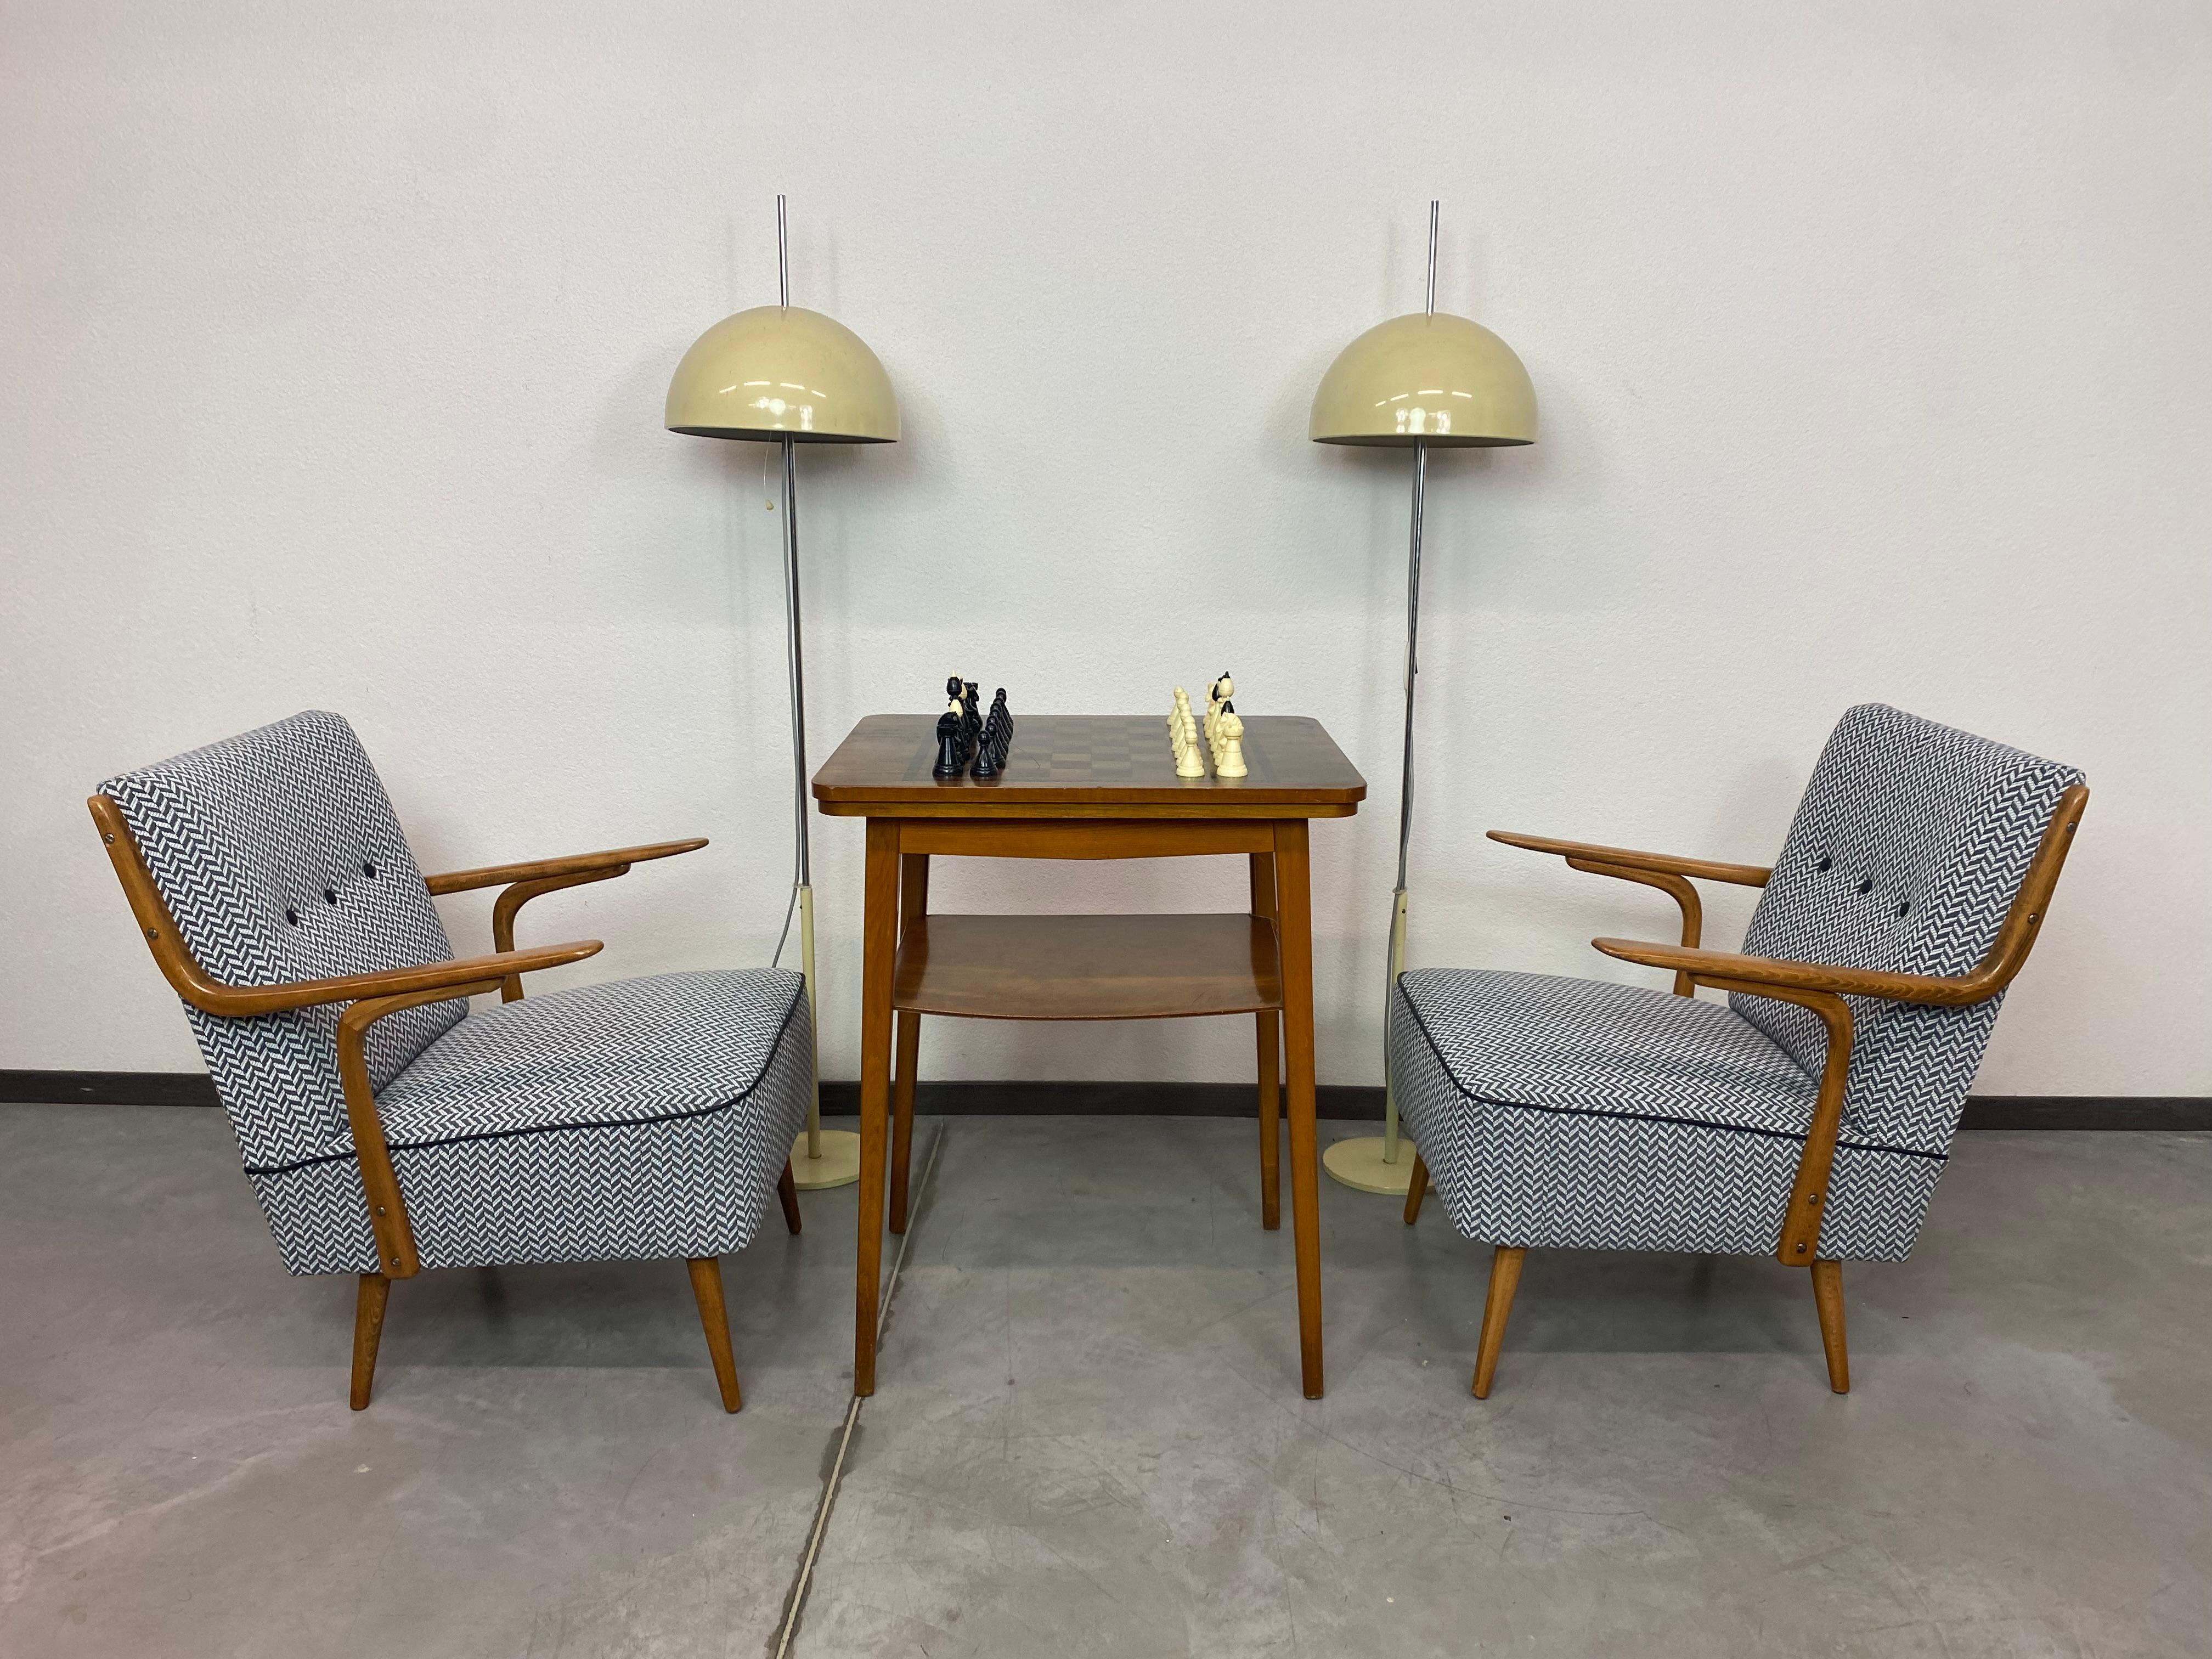 Midncenury design armchairs by Jozsef Peresztegi for Thonet professionally stained and repolished.